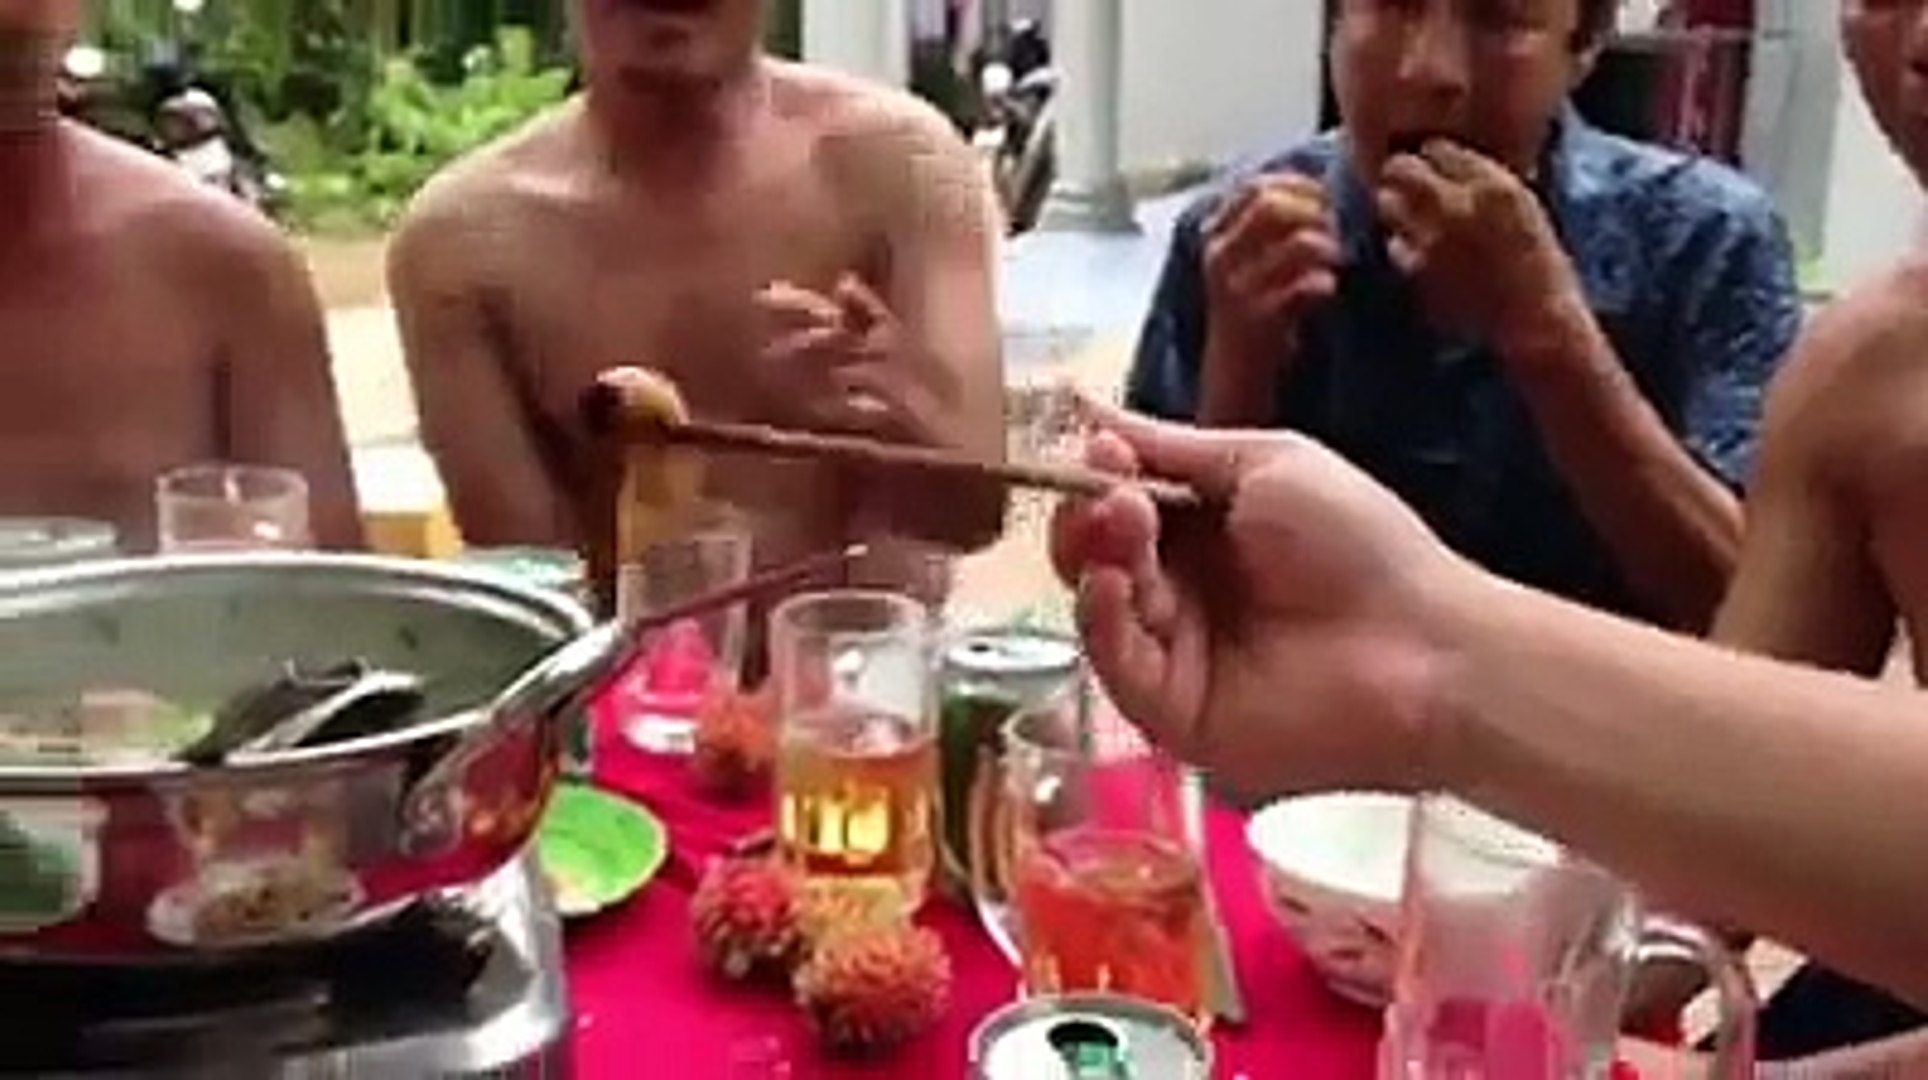 worm eating contest